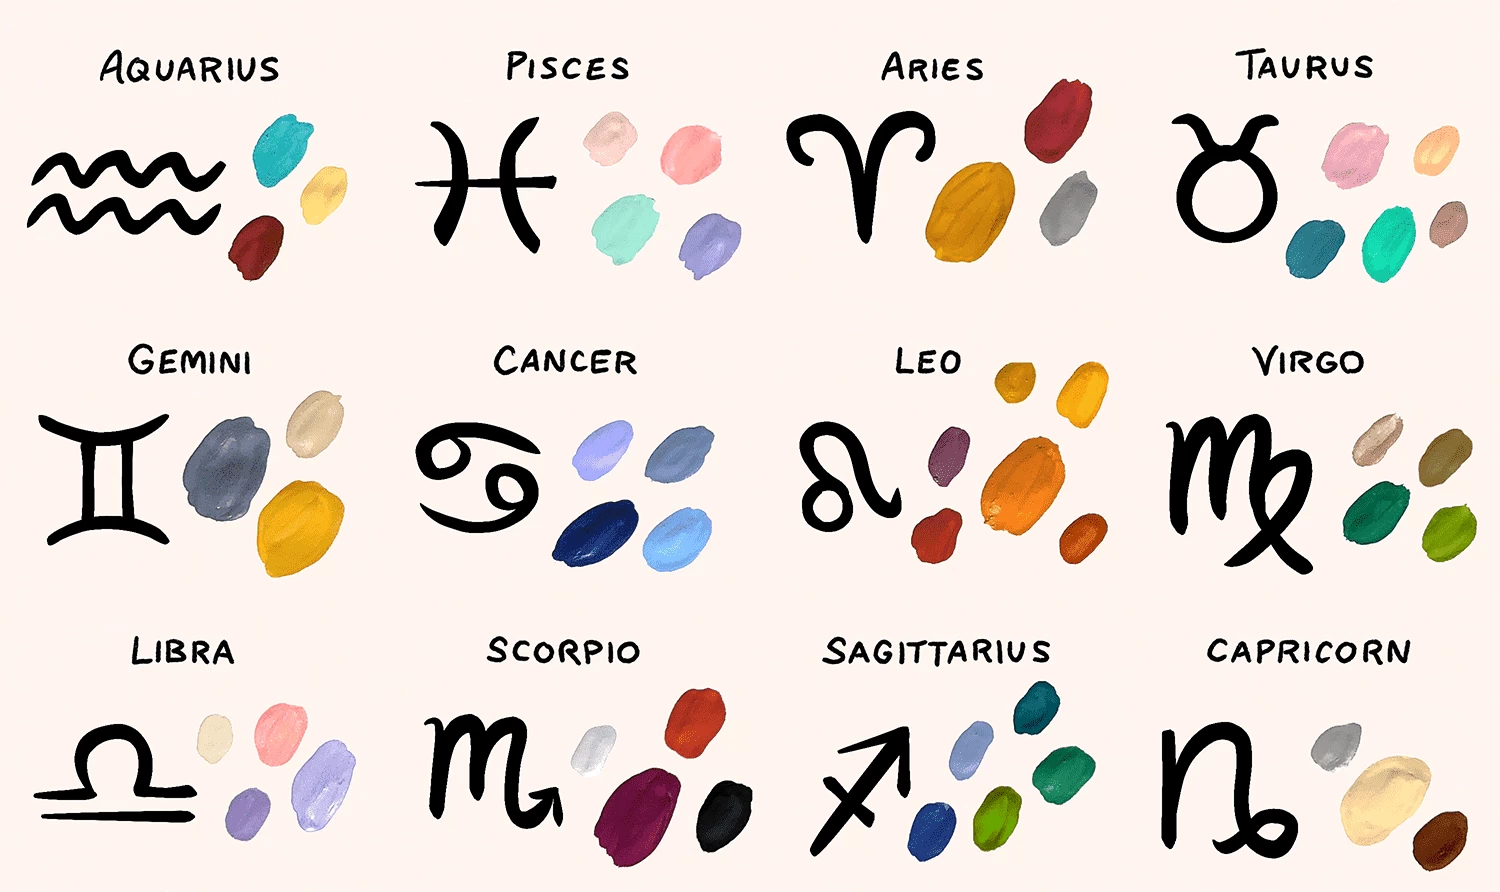 Favourite subjects according to Zodiac signs